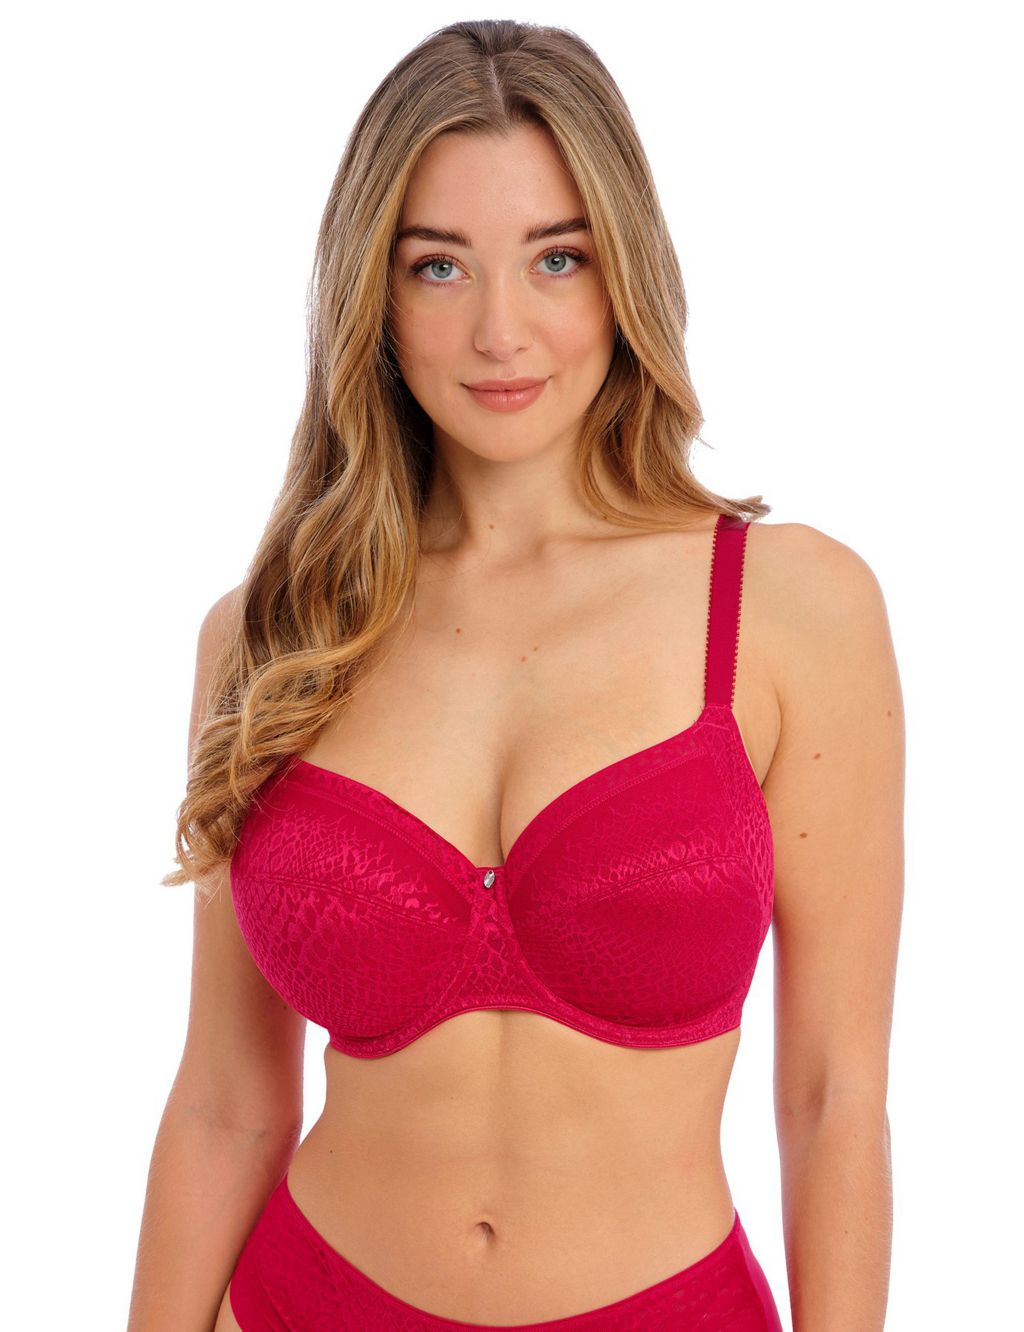 Envisage Wired Side Support Full Cup Bra D-HH image 1